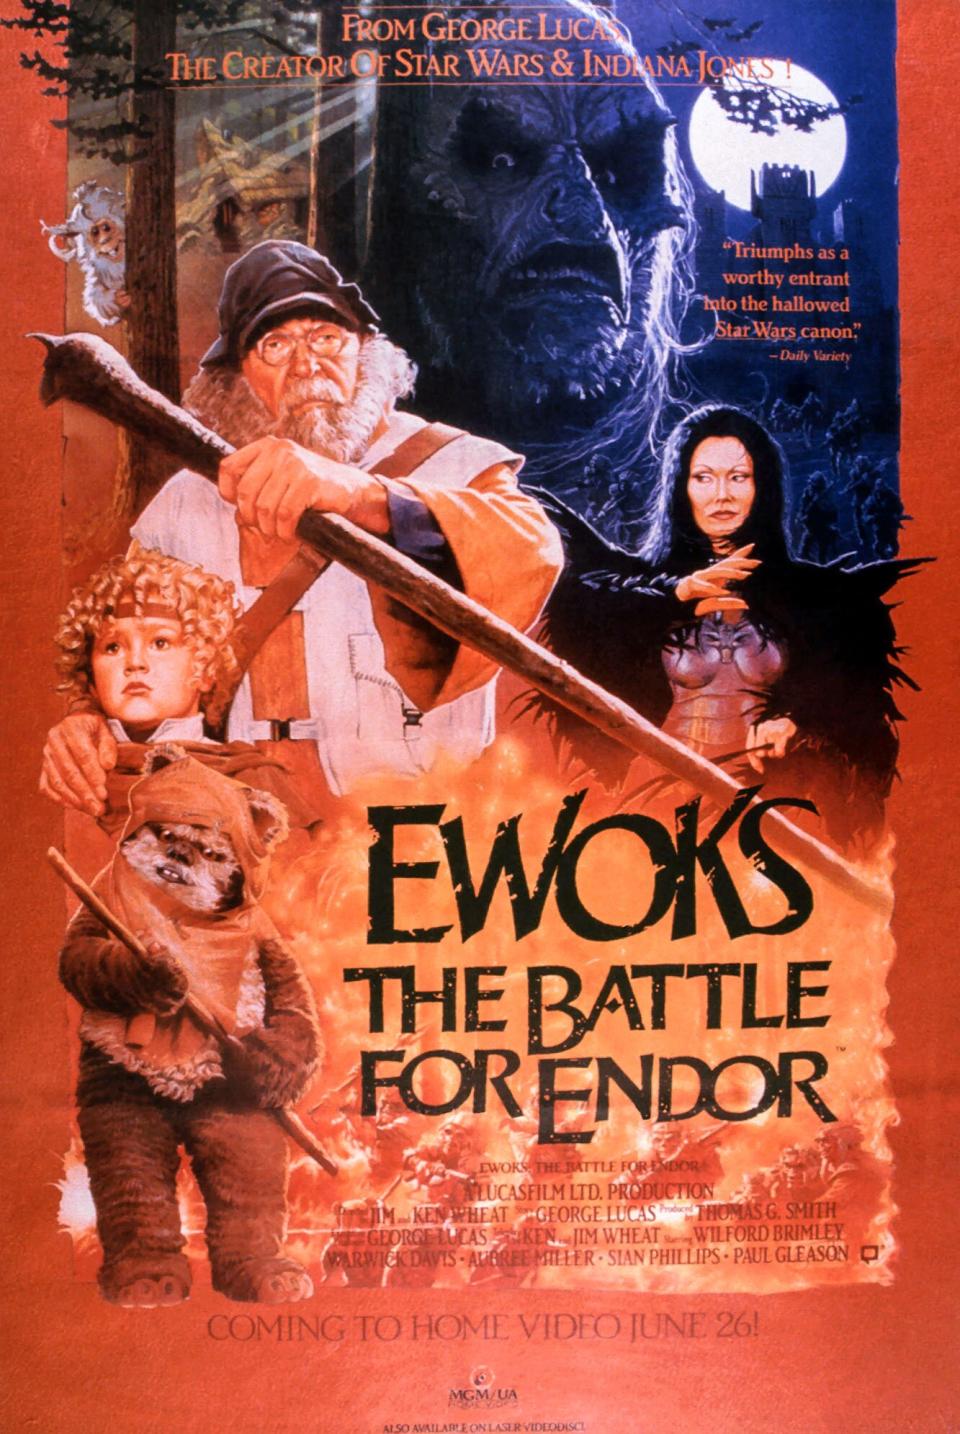 EWOKS: THE BATTLE FOR ENDOR, US poster, from left: Aubree Miller, Wilford Brimley, Sian Phillips